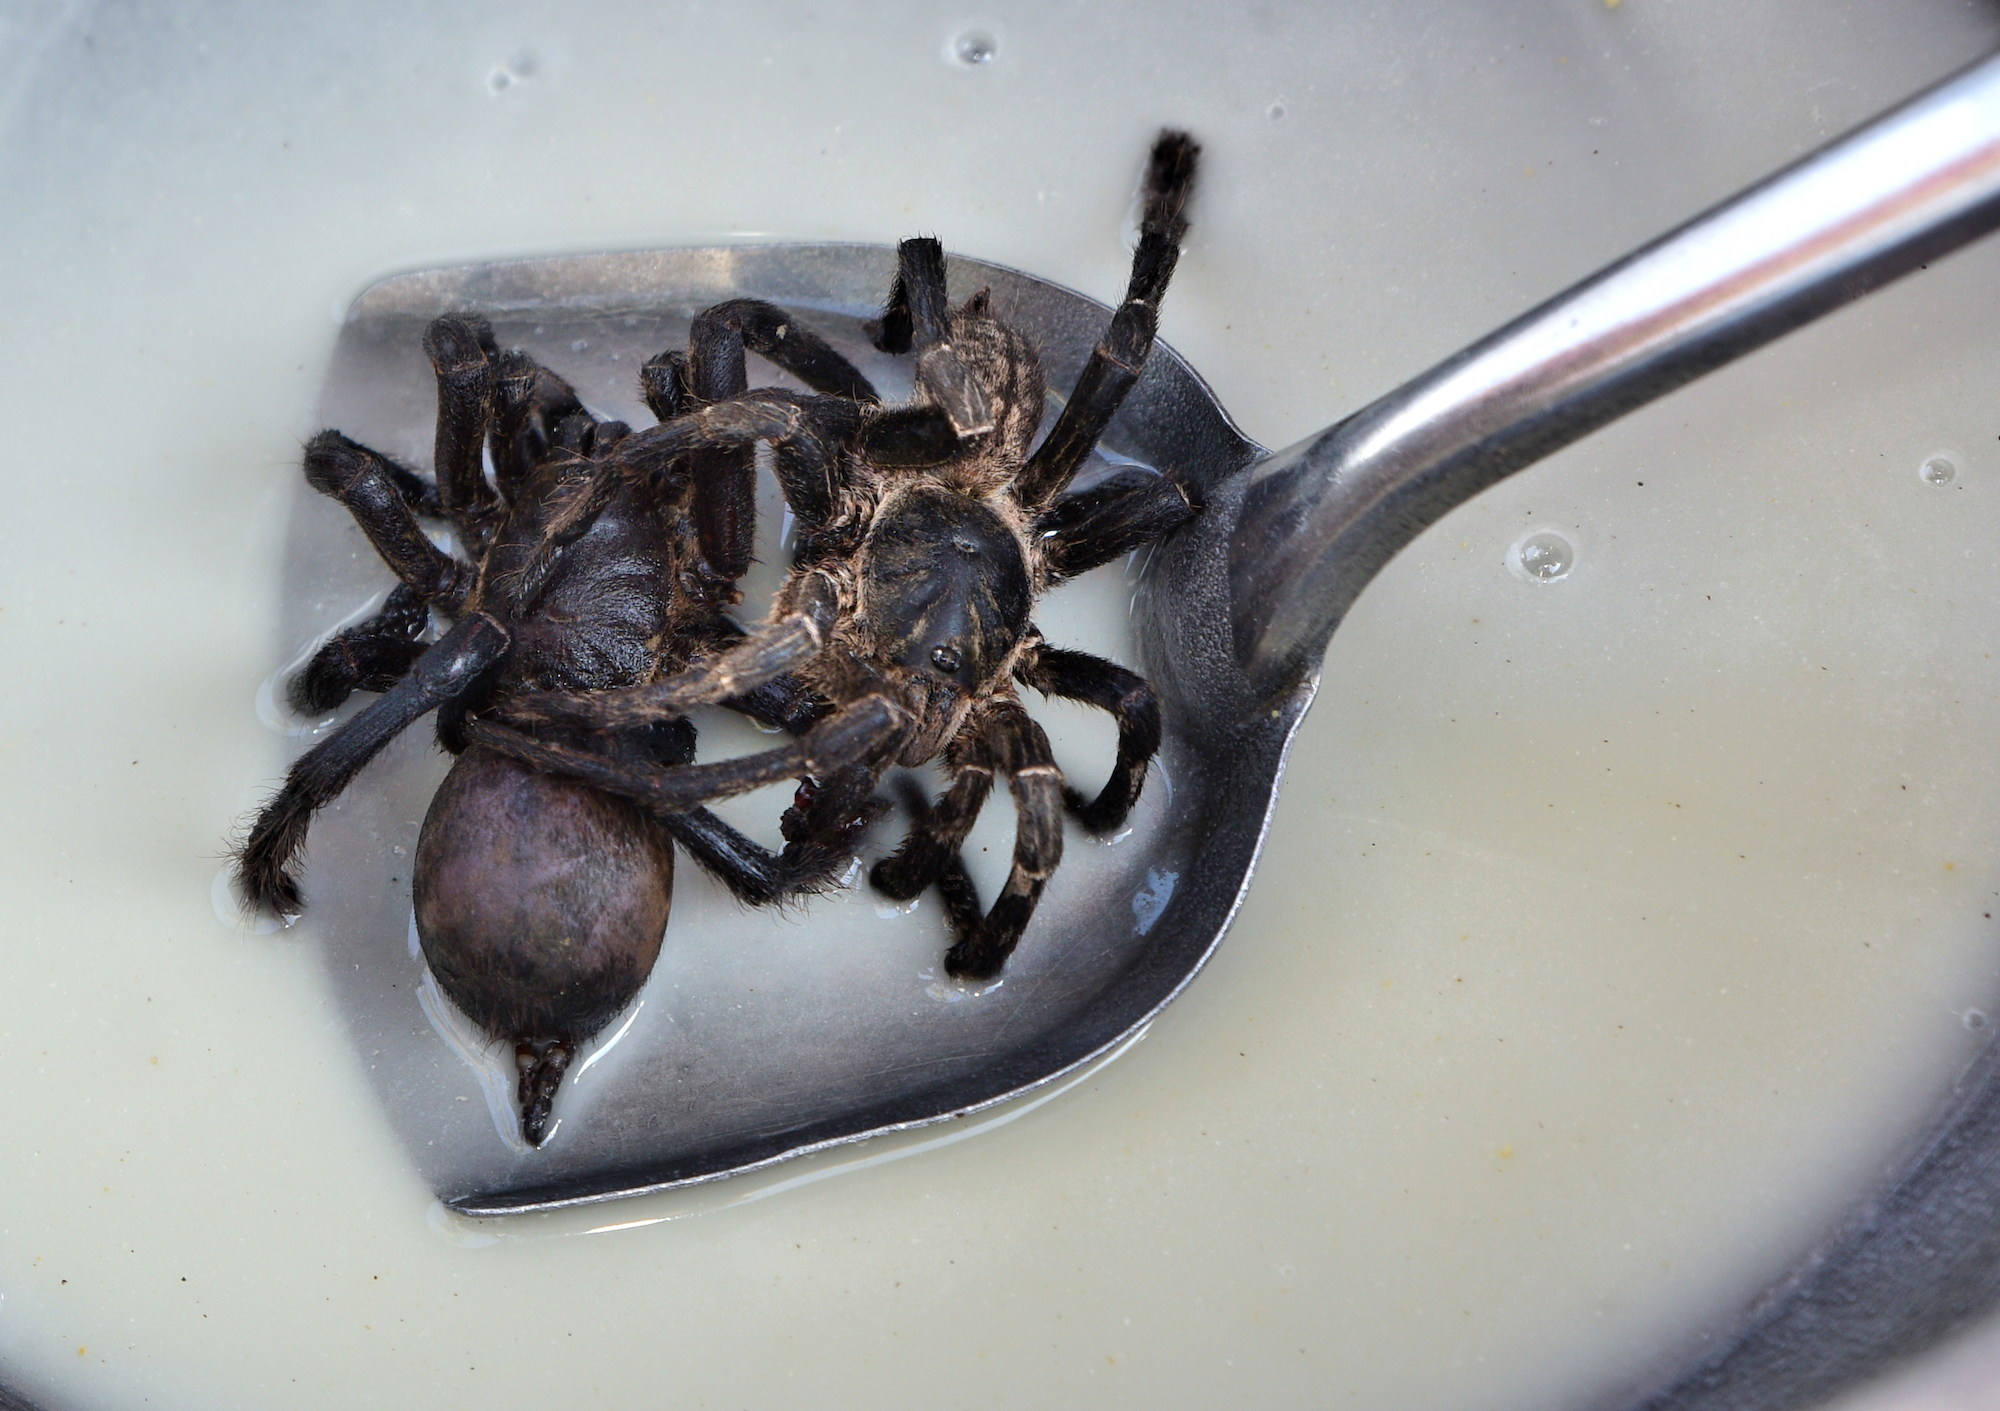 Cooking and eating tarantula spiders Cambodia | CNN Travel